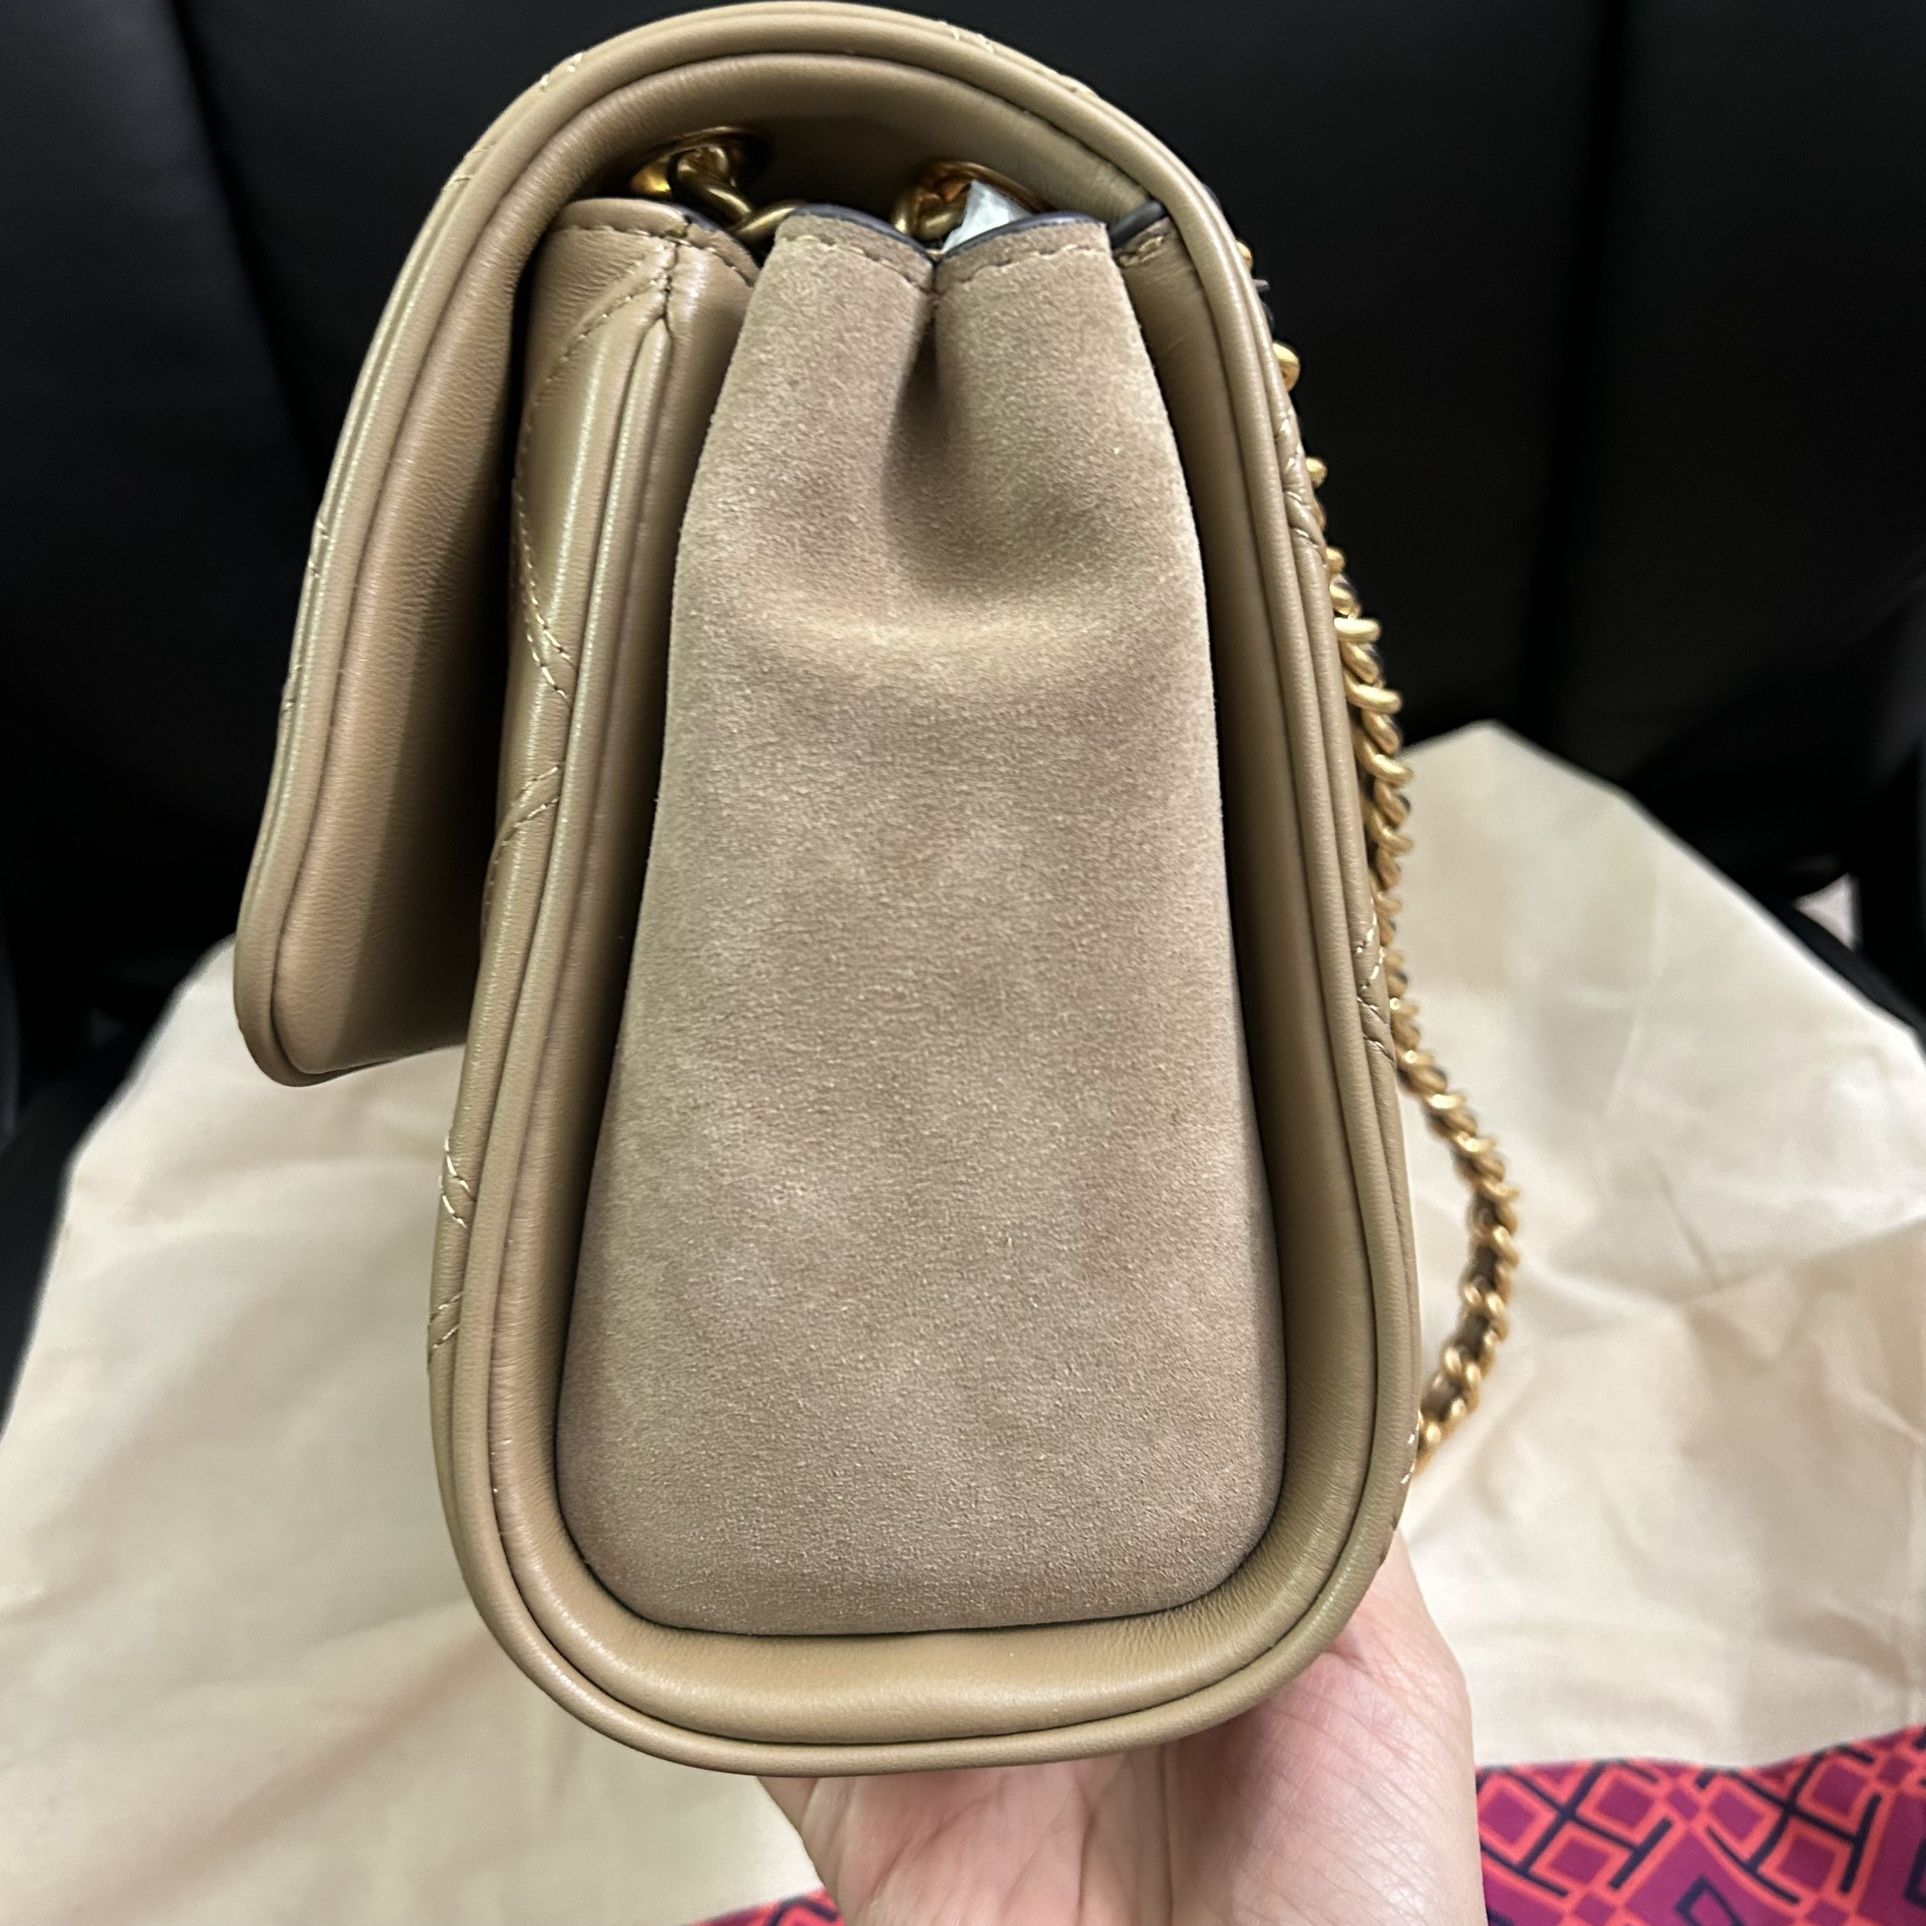 Tori Burch Kira Deconstructed Bag for Sale in Seaford, NY - OfferUp